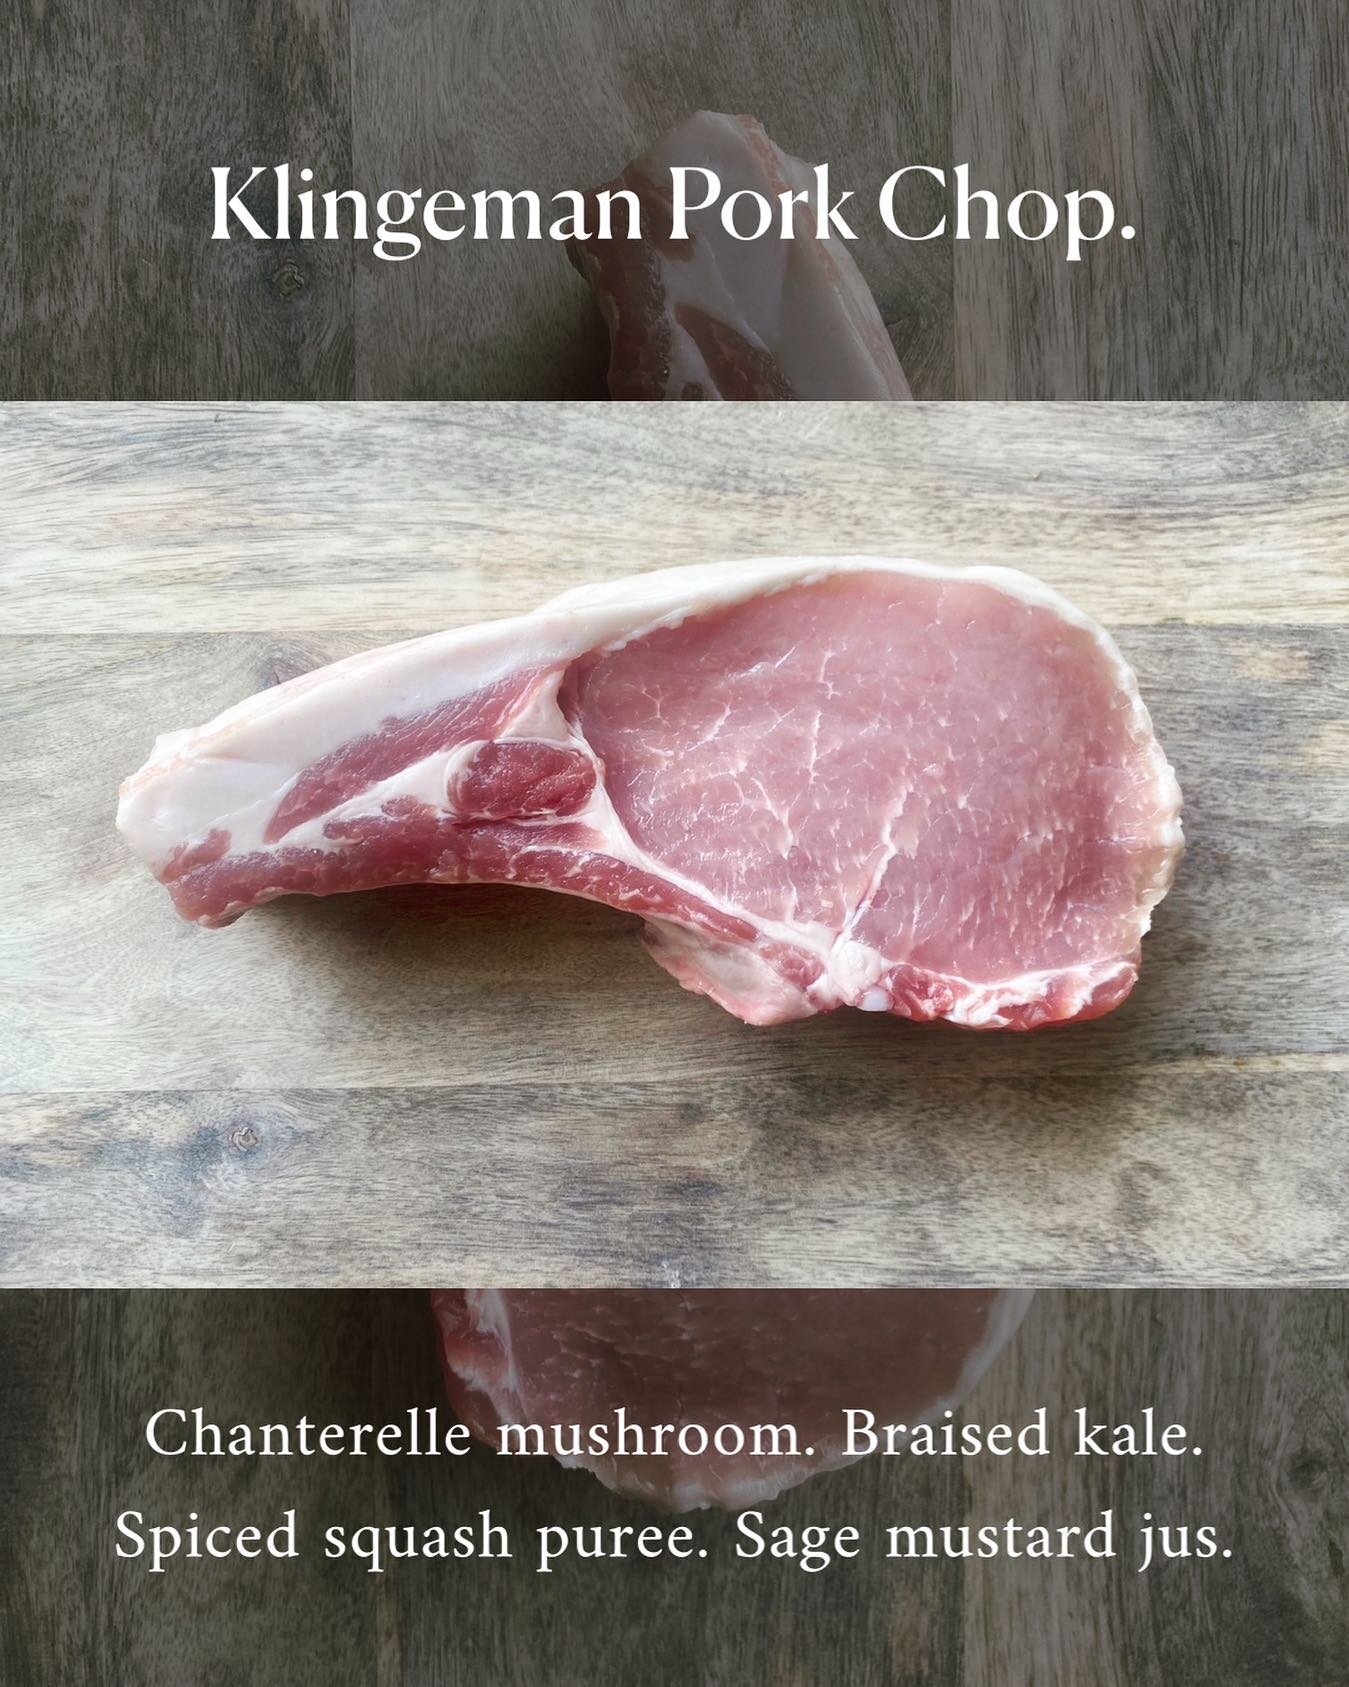 ORDER BY 5PM TODAY (10/27)! We&rsquo;re bringing in Klingeman pork tomorrow through @creamco_meats. The Klingeman family are pioneers of humane animal husbandry and dietary practices. Klingeman Farms was the first Non-GMO Project Verified ranch, as w